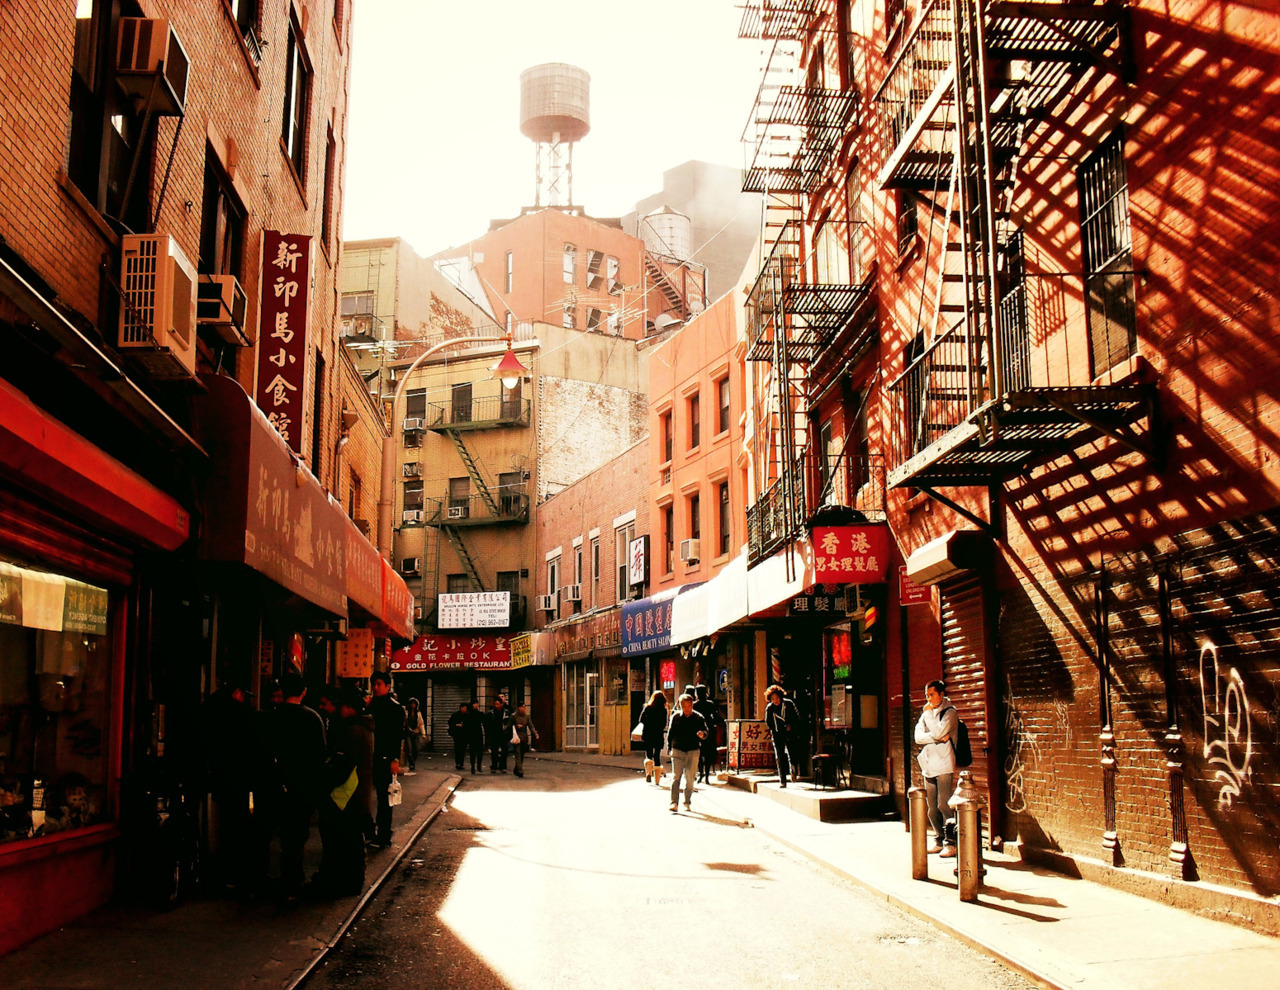 Colorful photos of Chinatown in New York City | BOOMSbeat